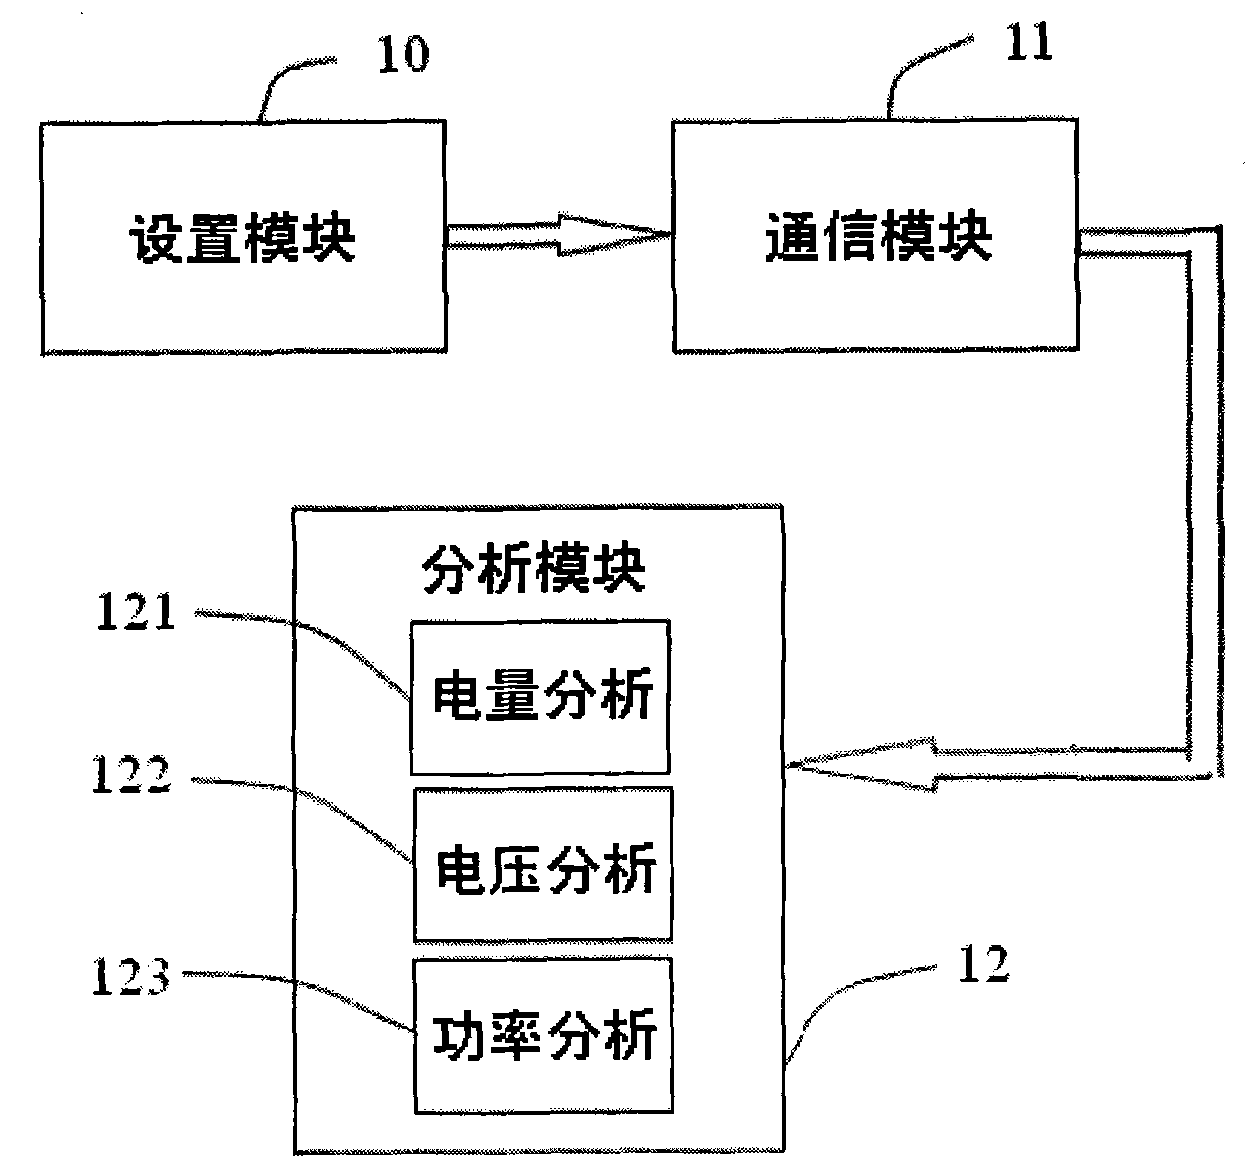 System and method for automatically checking failure of metering equipment